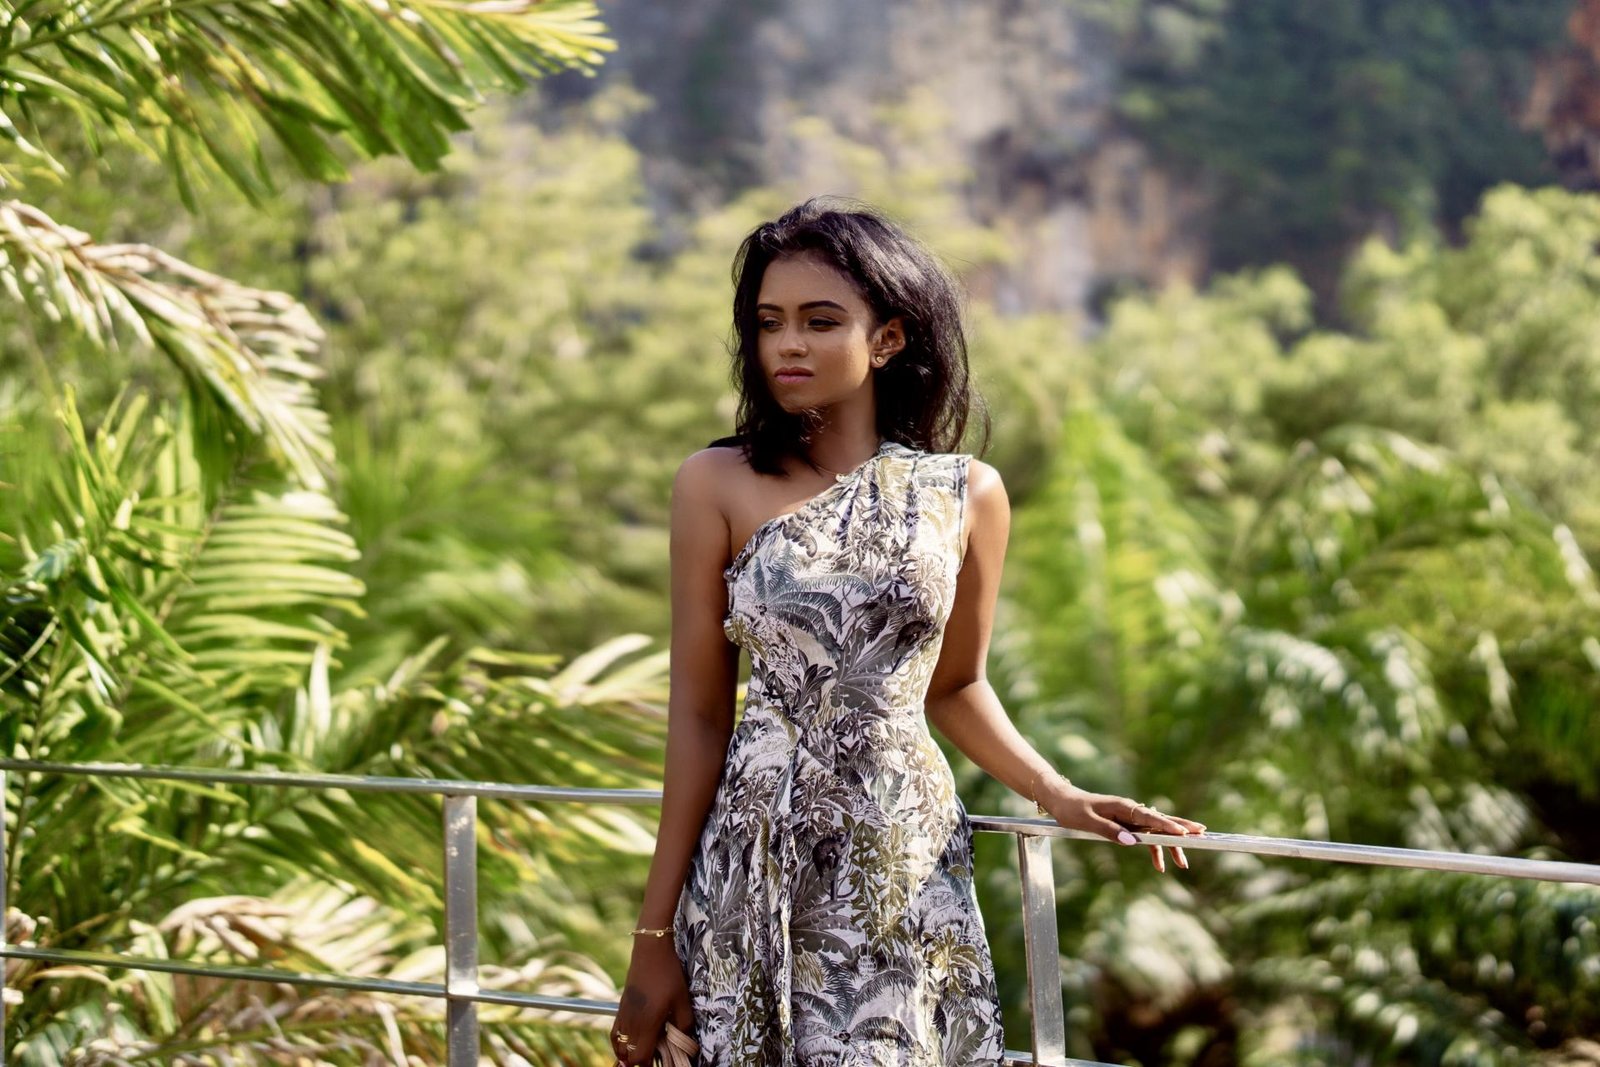 Sachini wearing a white and green Reiss dress with exotic trees in the background